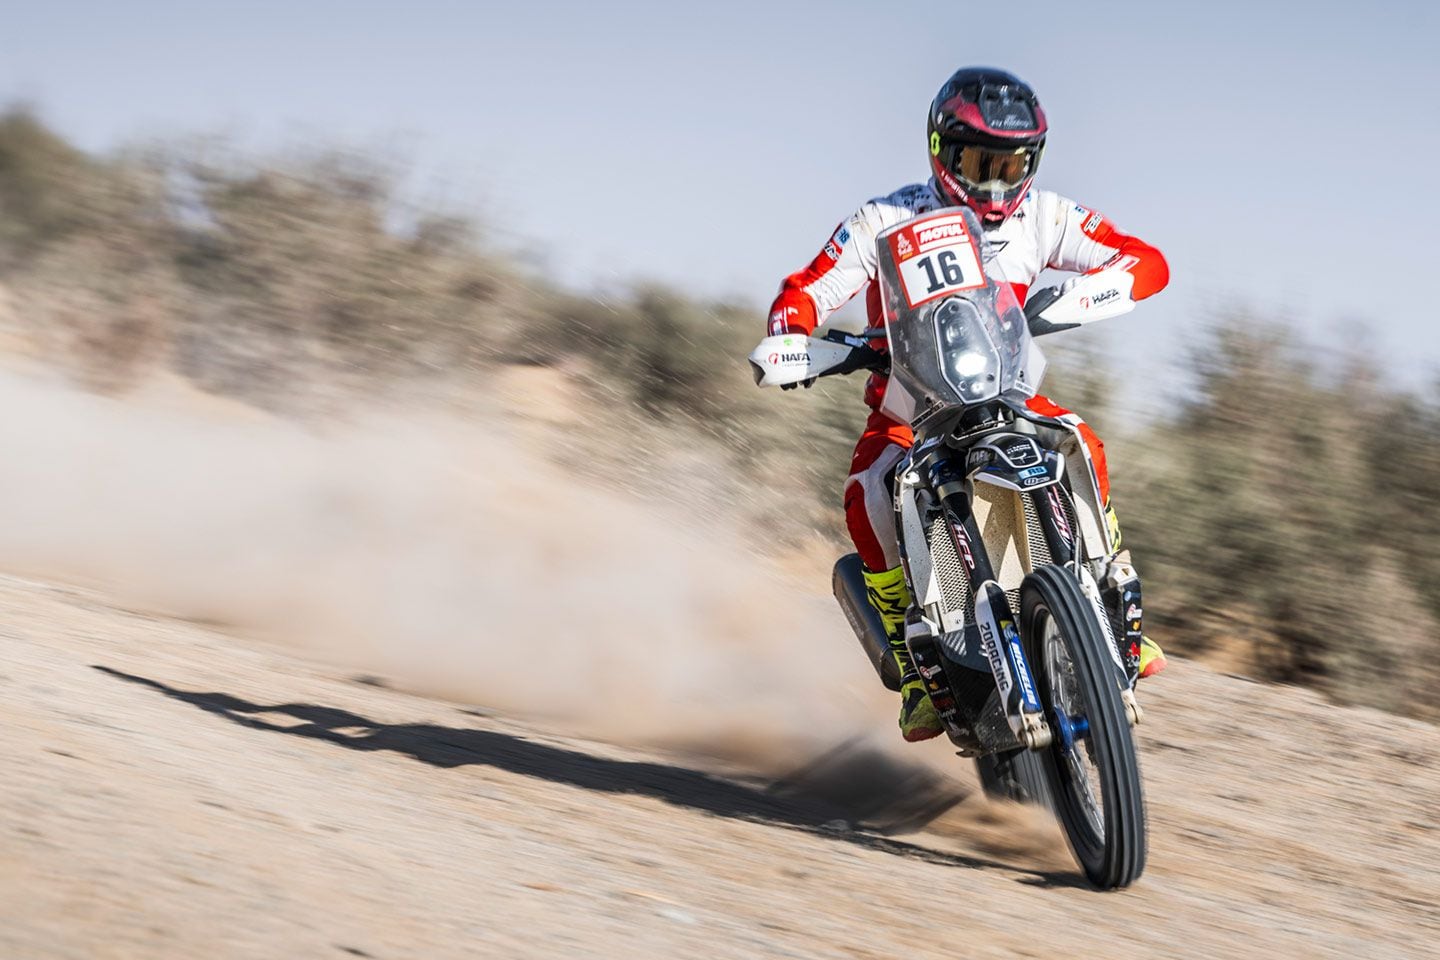 Romain Dumontier’s Team Dumontier Racing Husqvarna powers through Stage 3. He finished 12th overall.